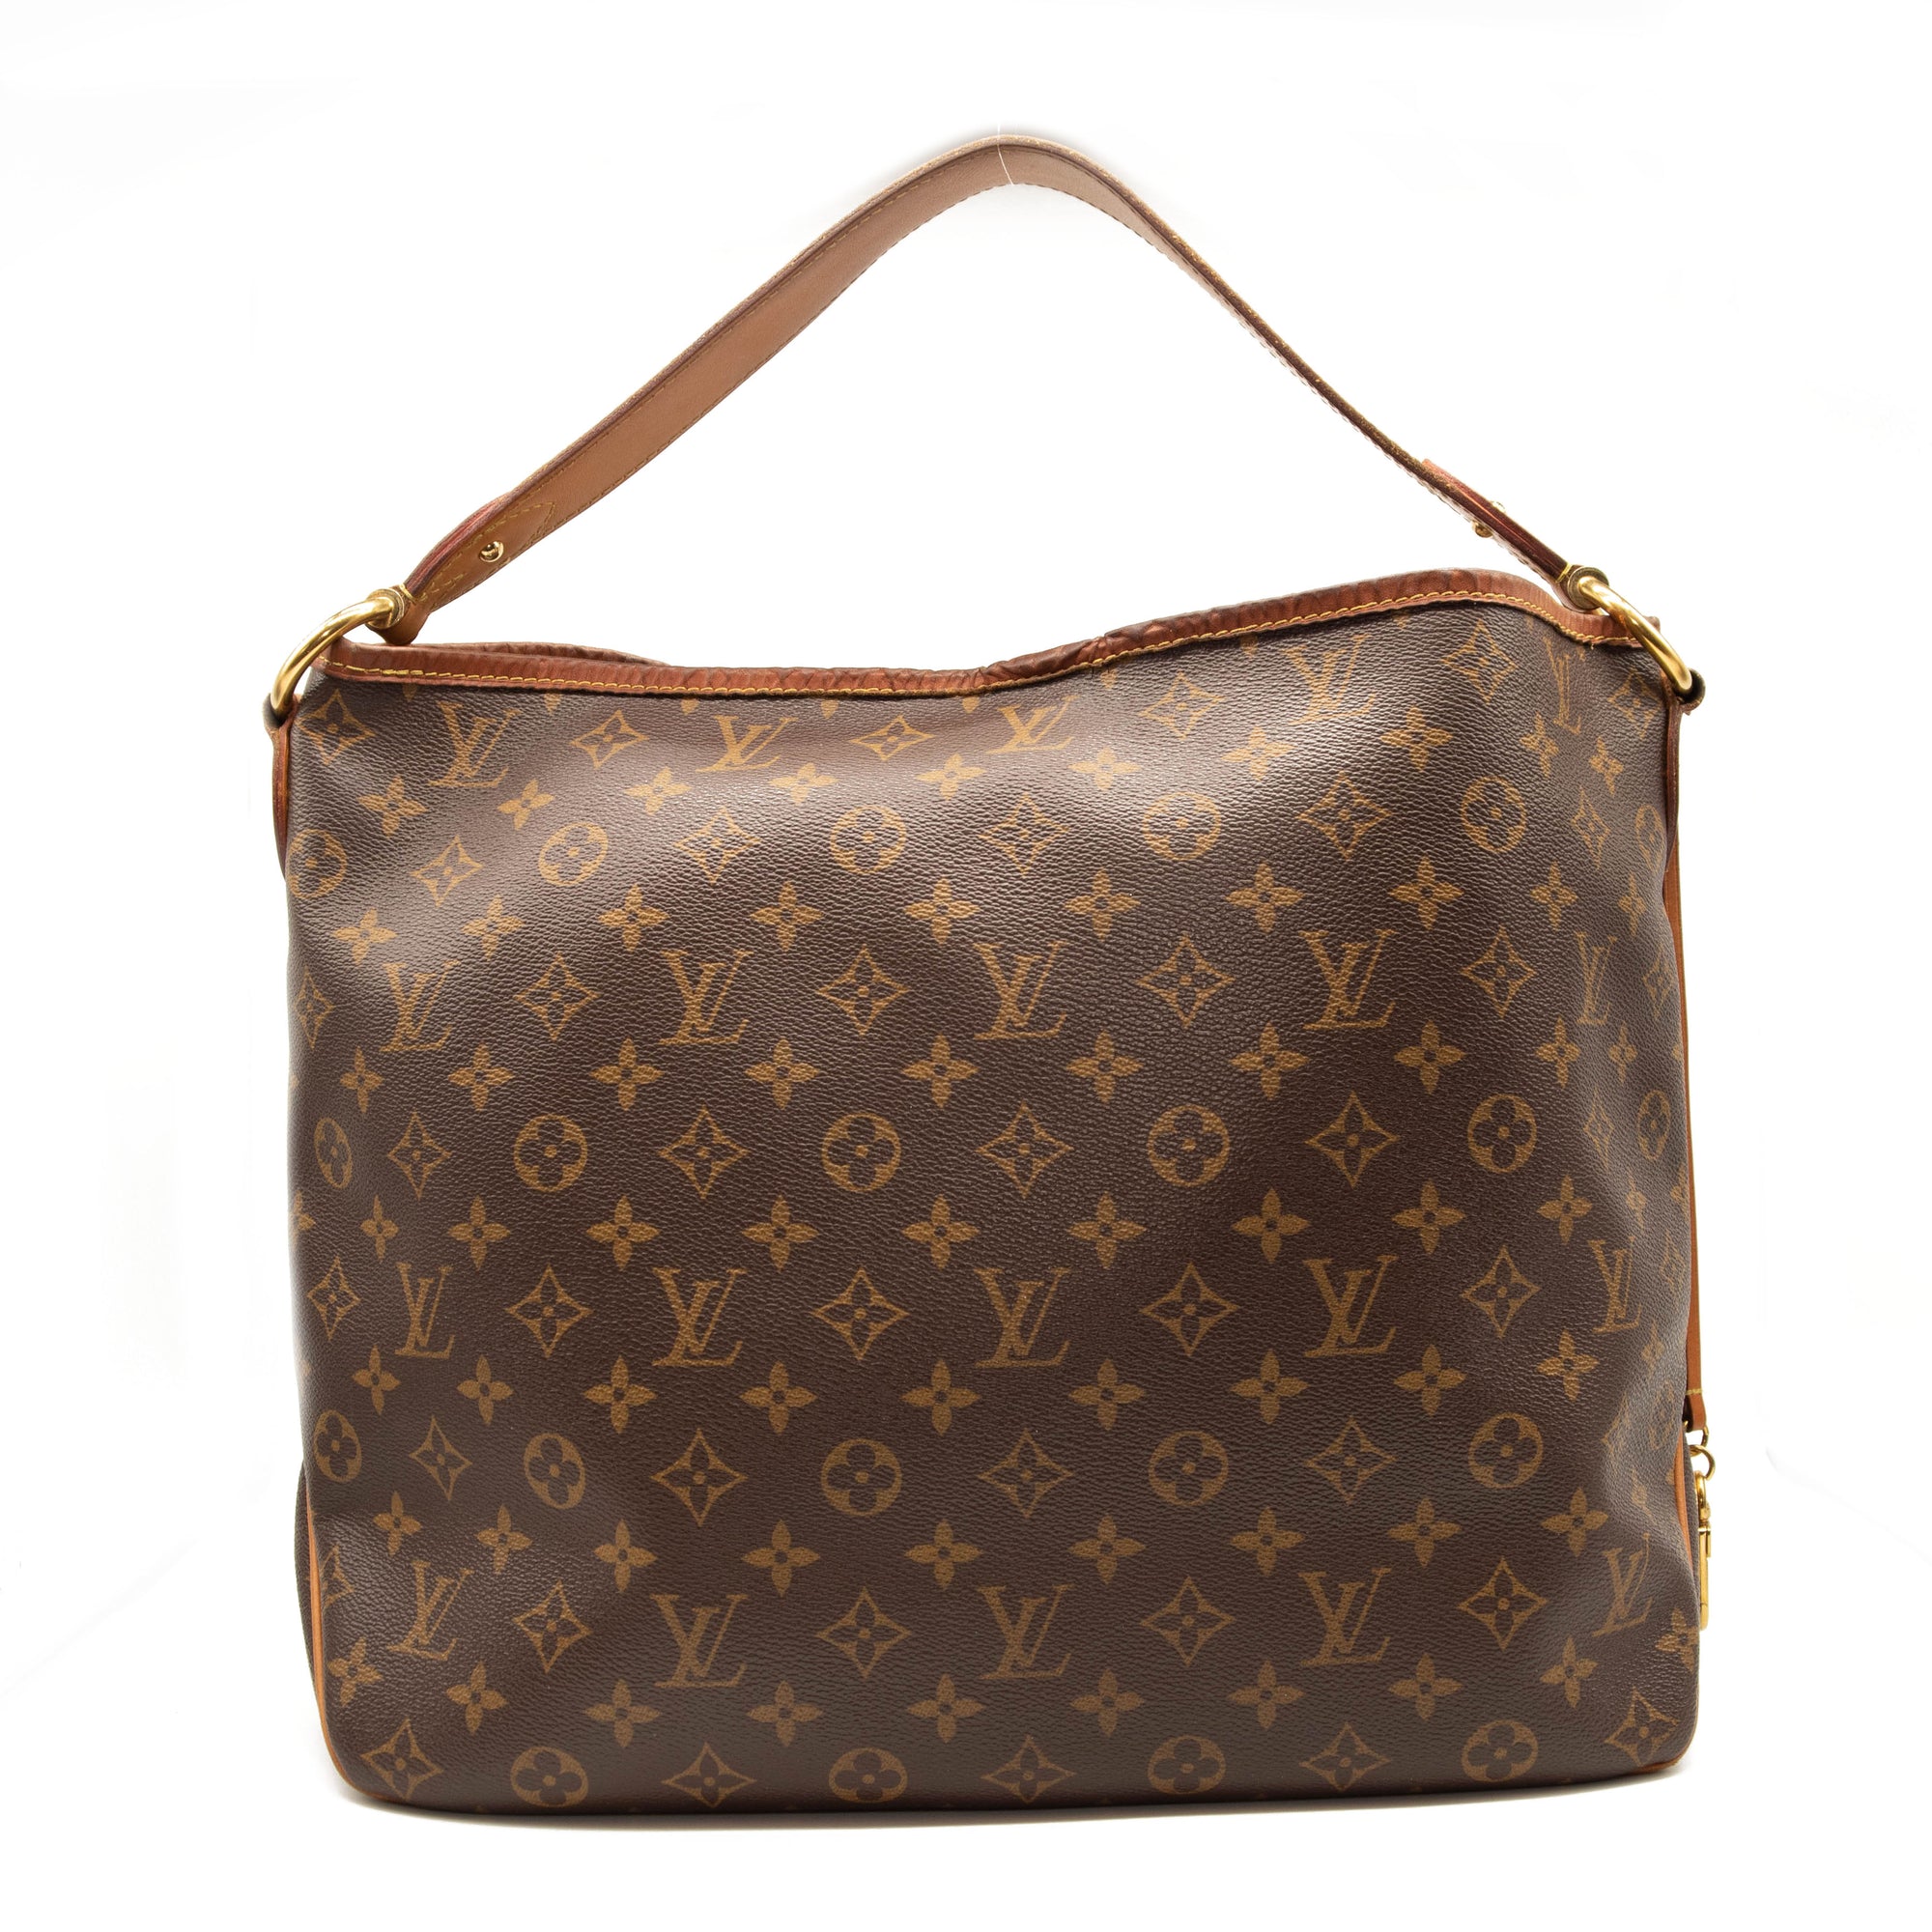 What's in my purse featuring my Louis Vuitton Delightful PM 